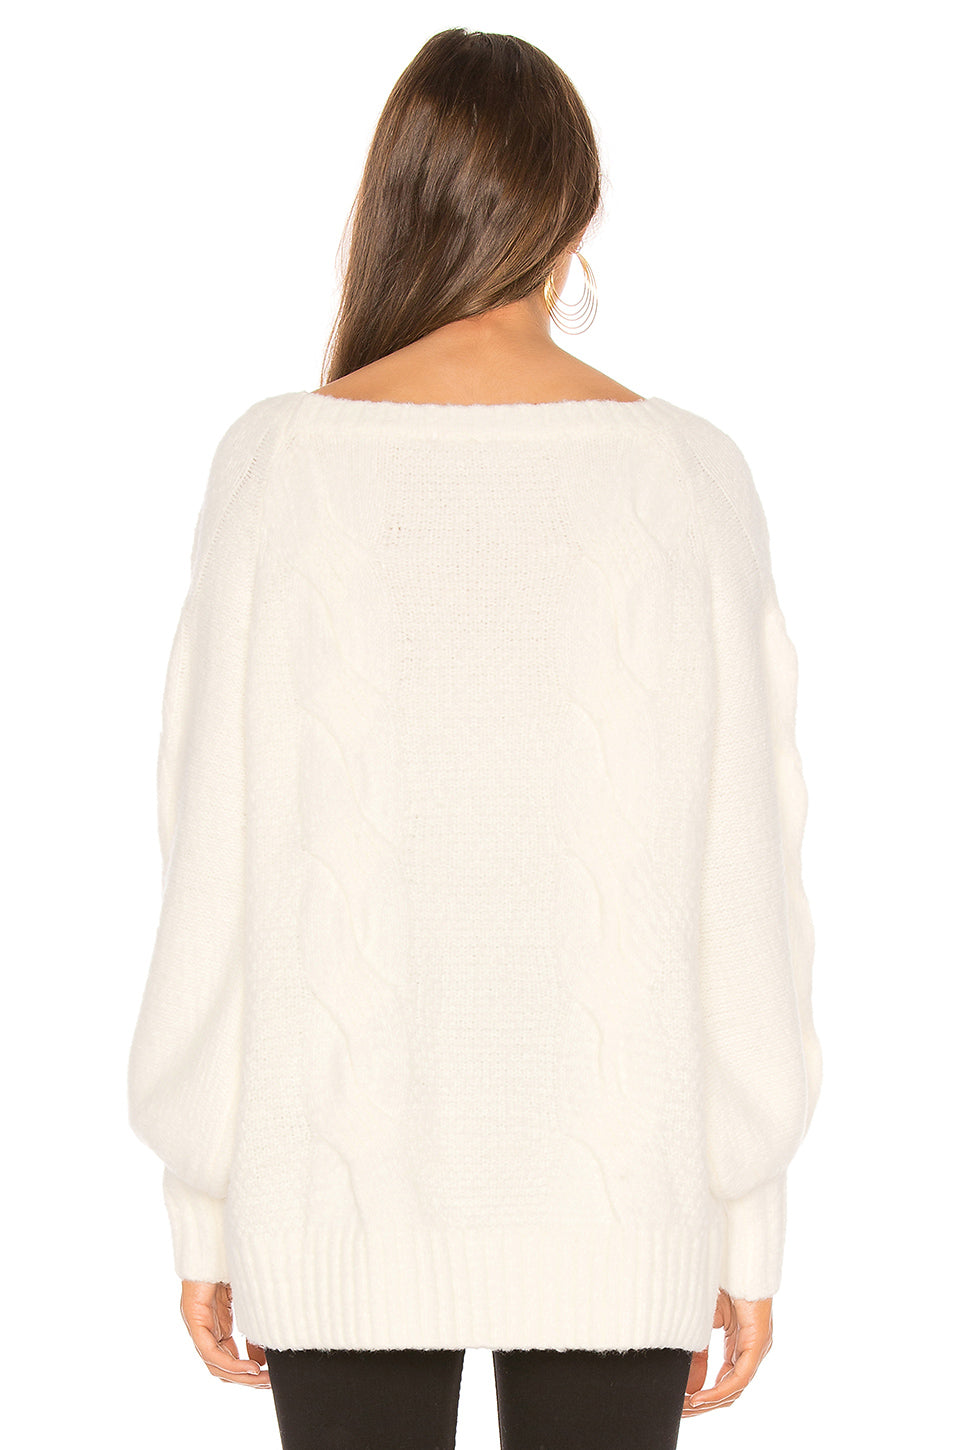 Cloud Sweater in IVORY